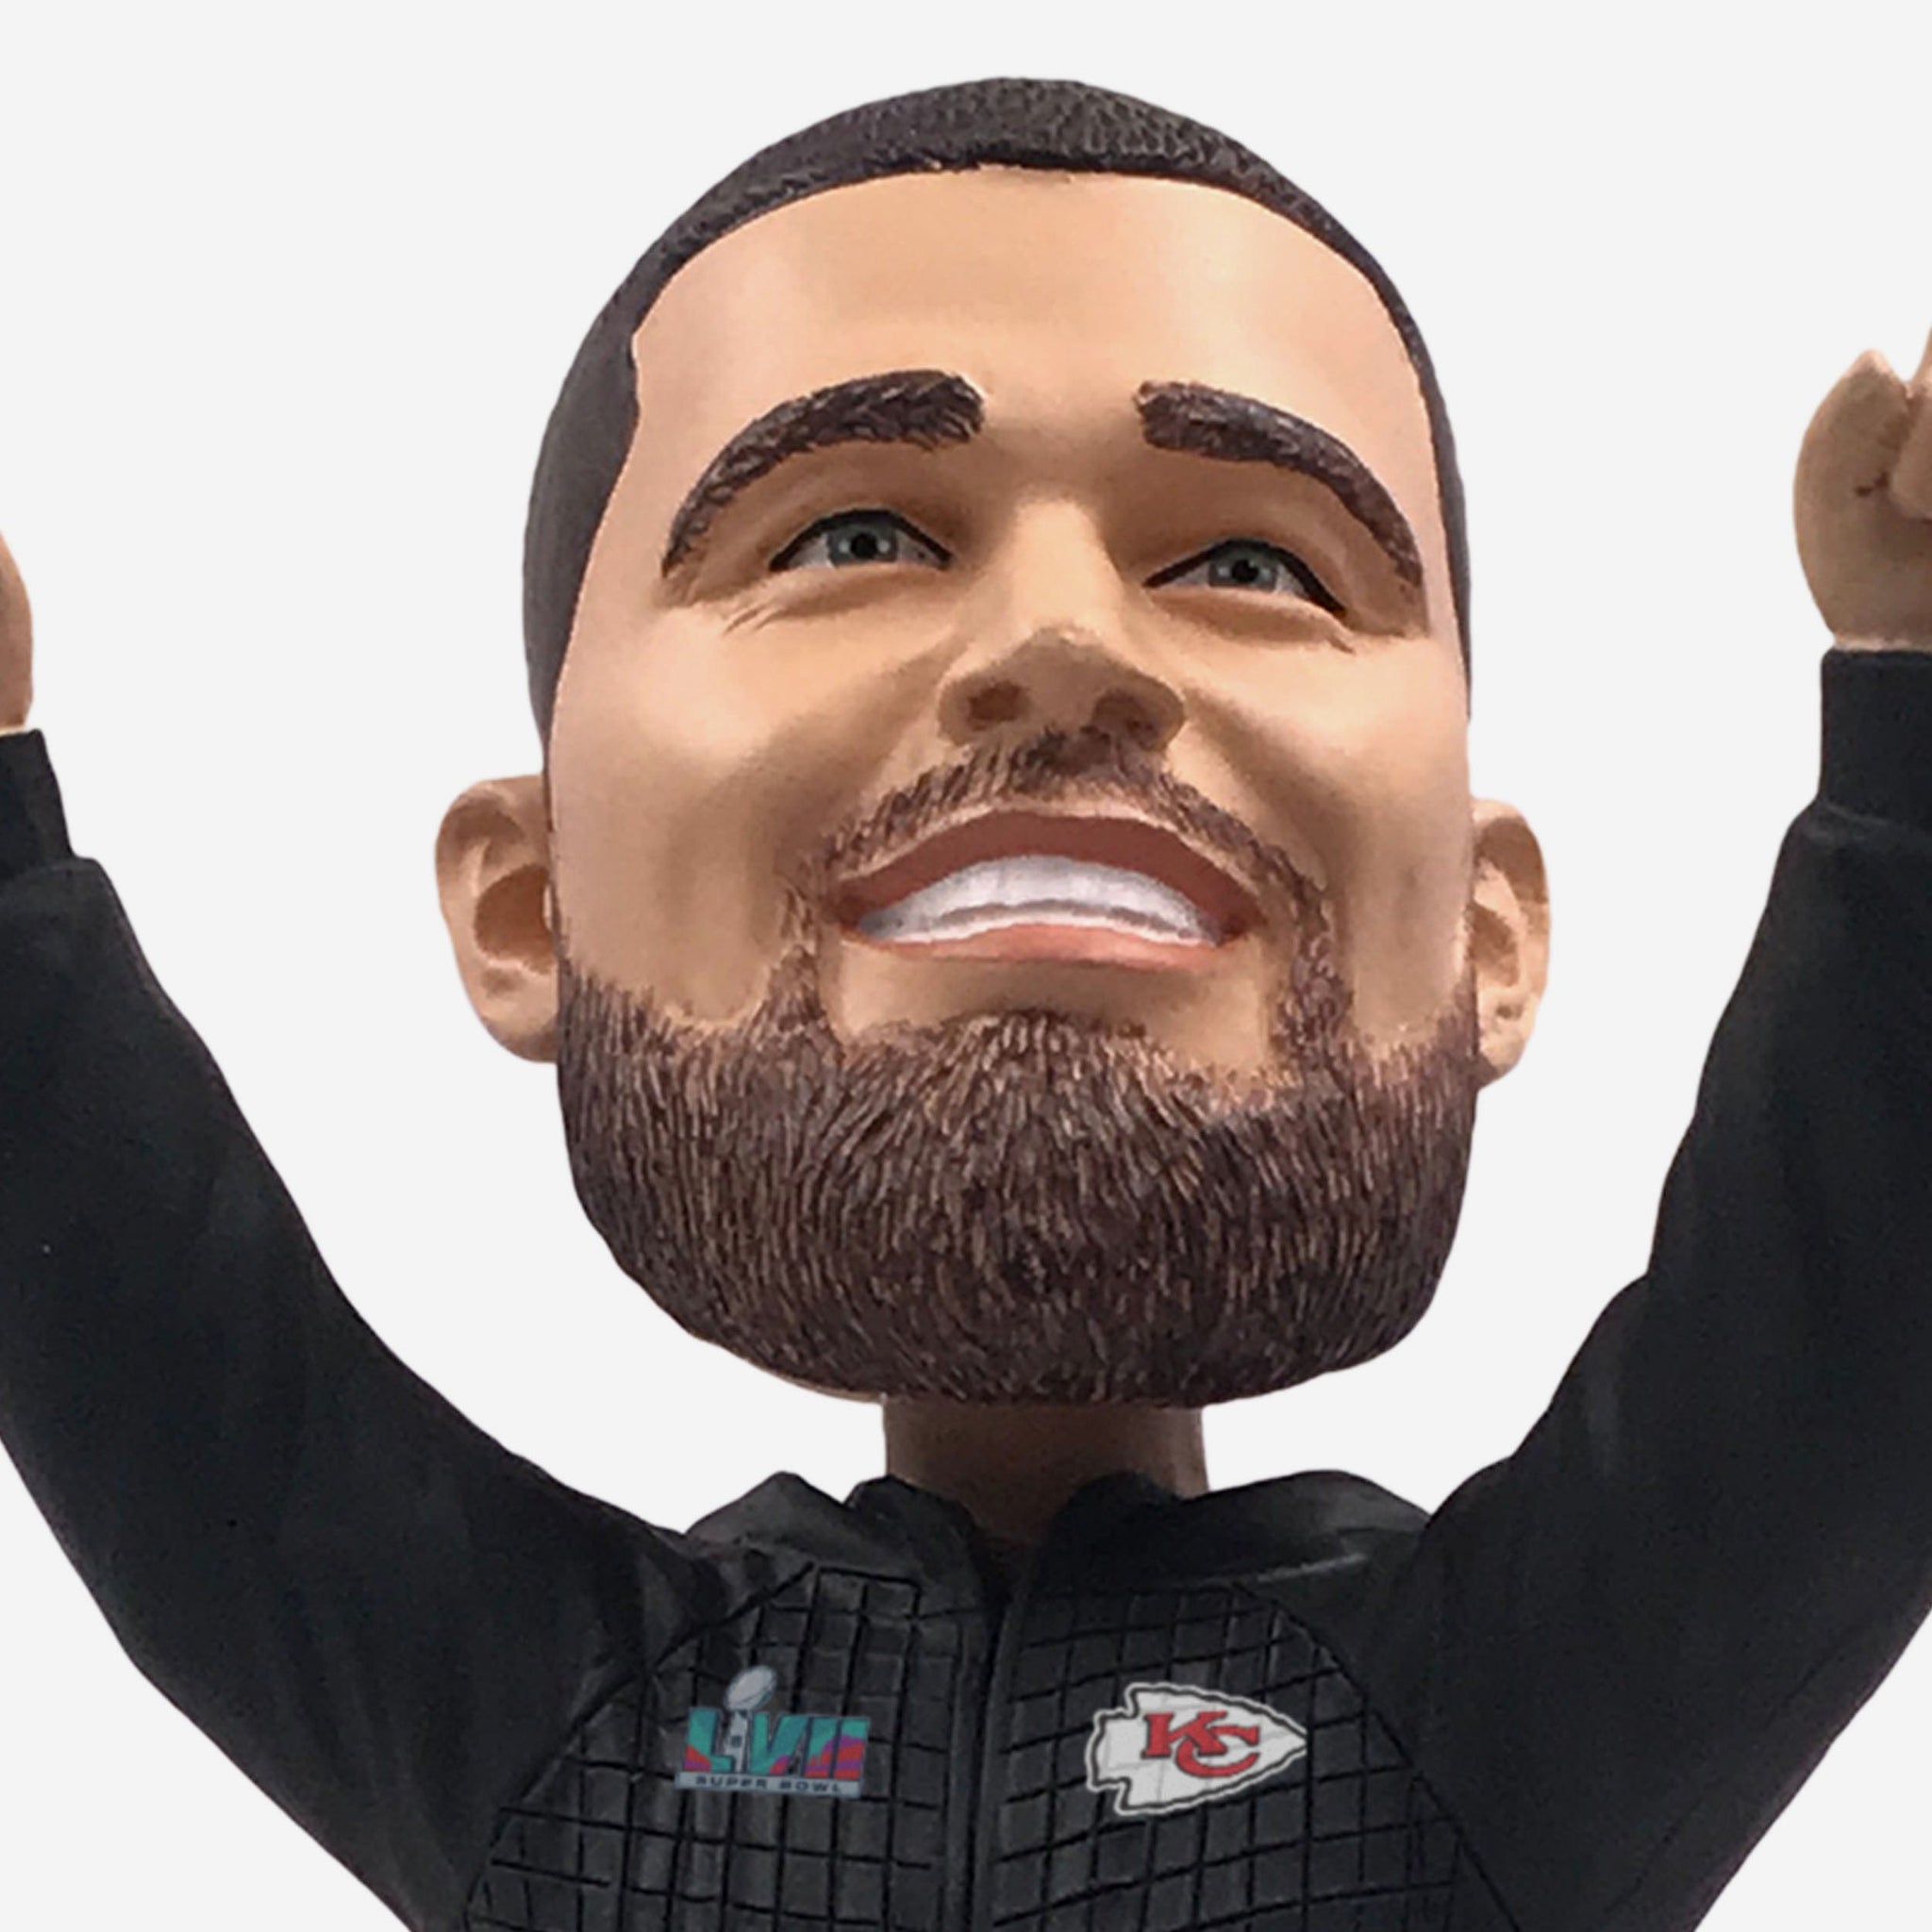 Kelce brothers bobblehead to apparel and more: Cleveland Cavaliers